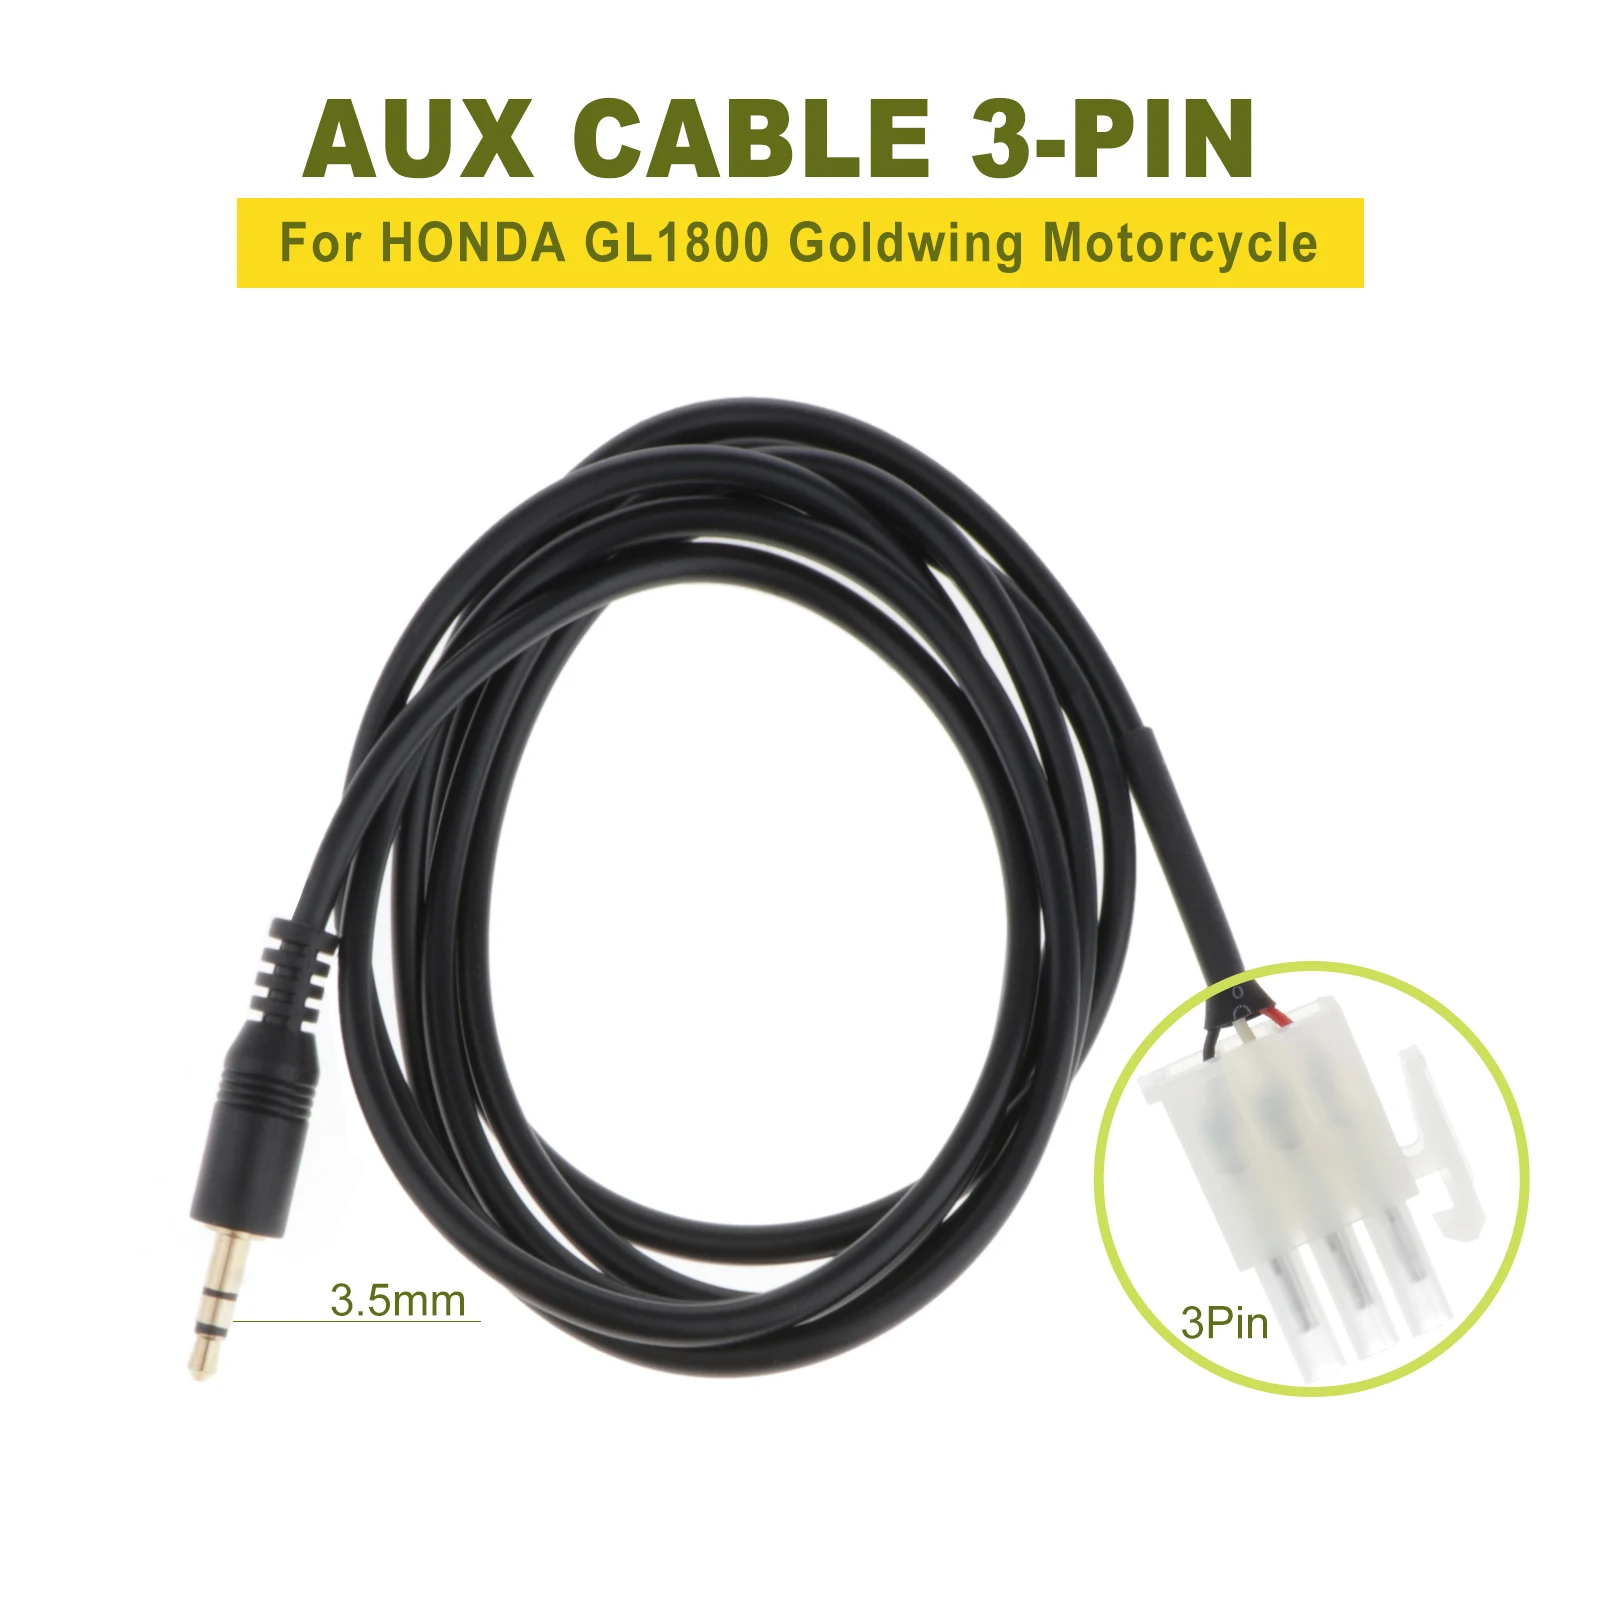 3.5mm Moto AUX Audio Cable Male Line 3-PIN for Honda G L1800 Goldwing